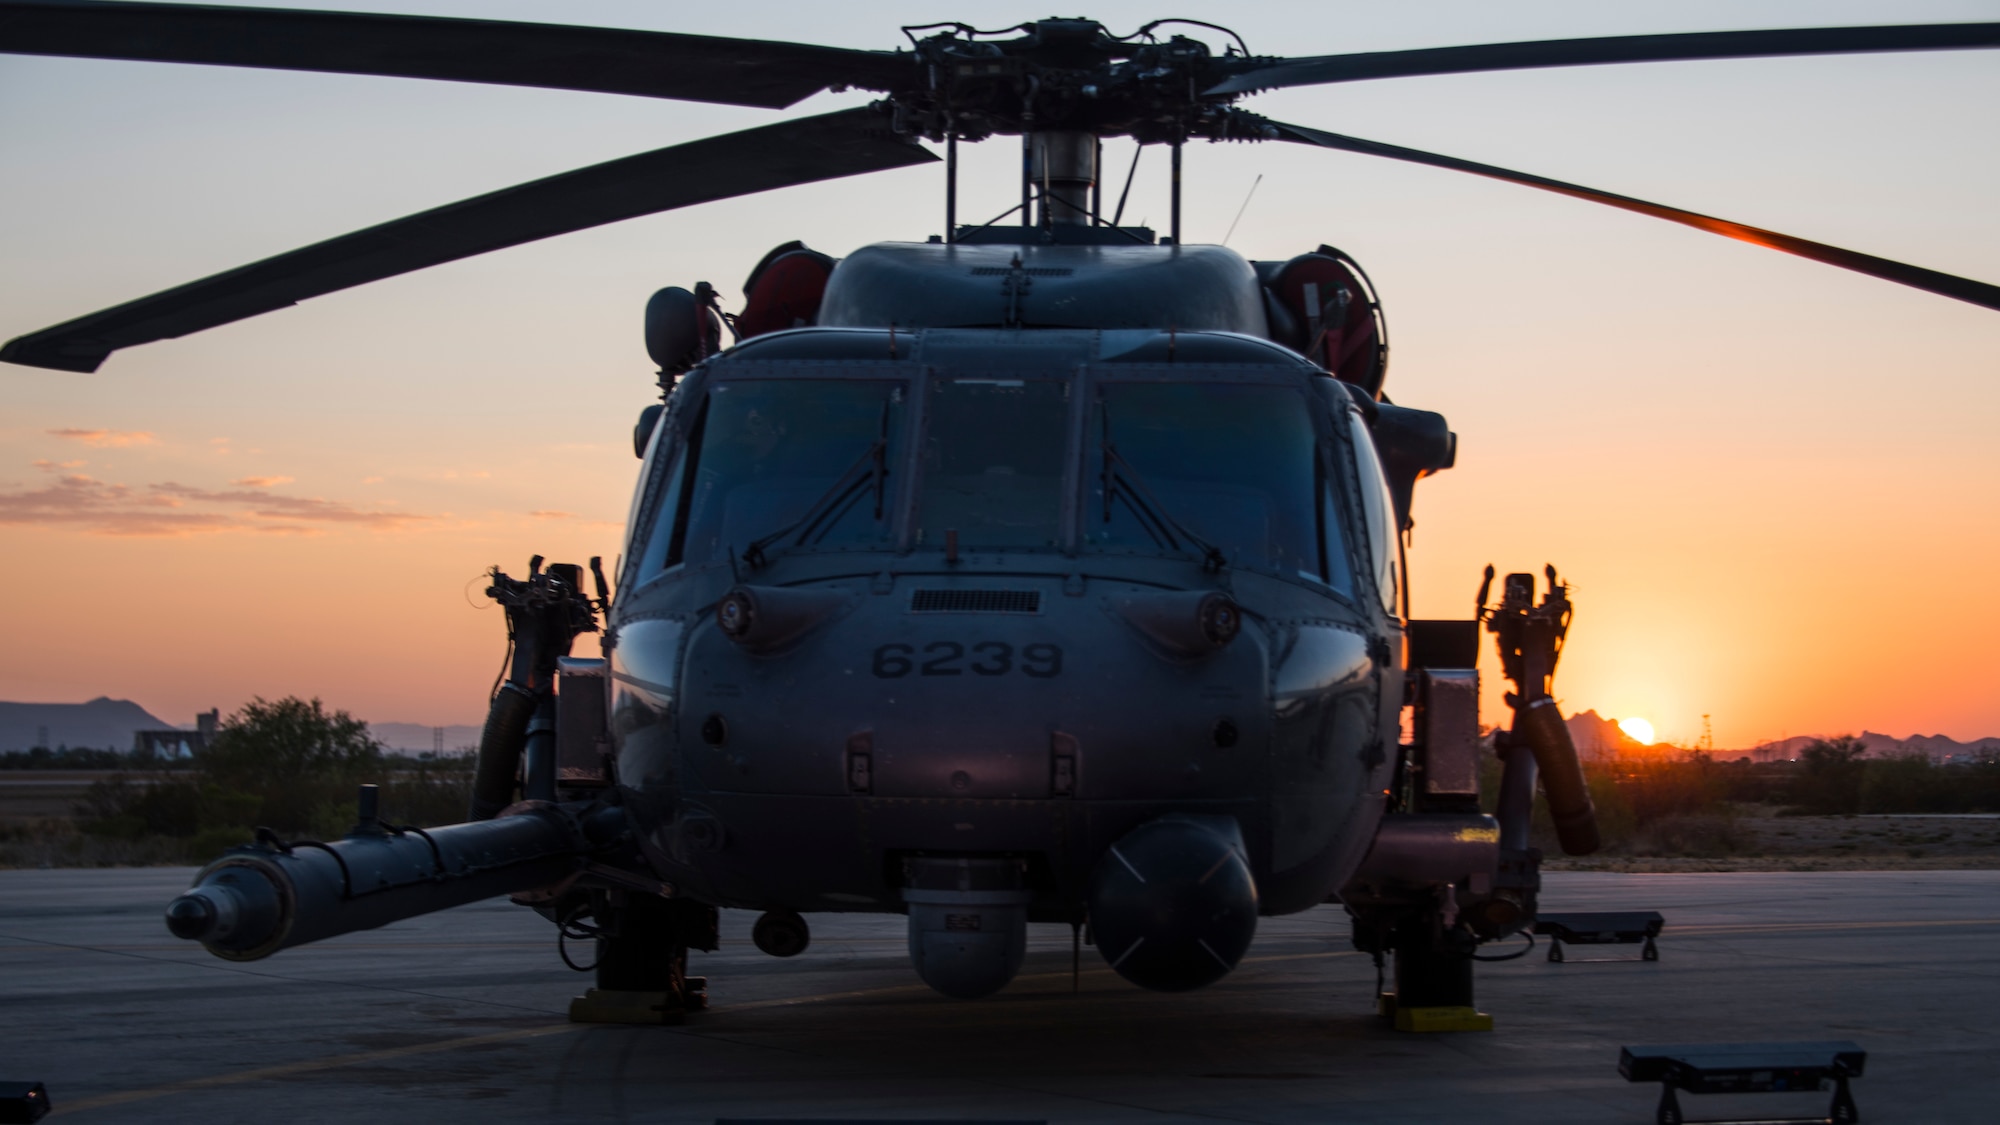 A photo of a helicopter on the flight line